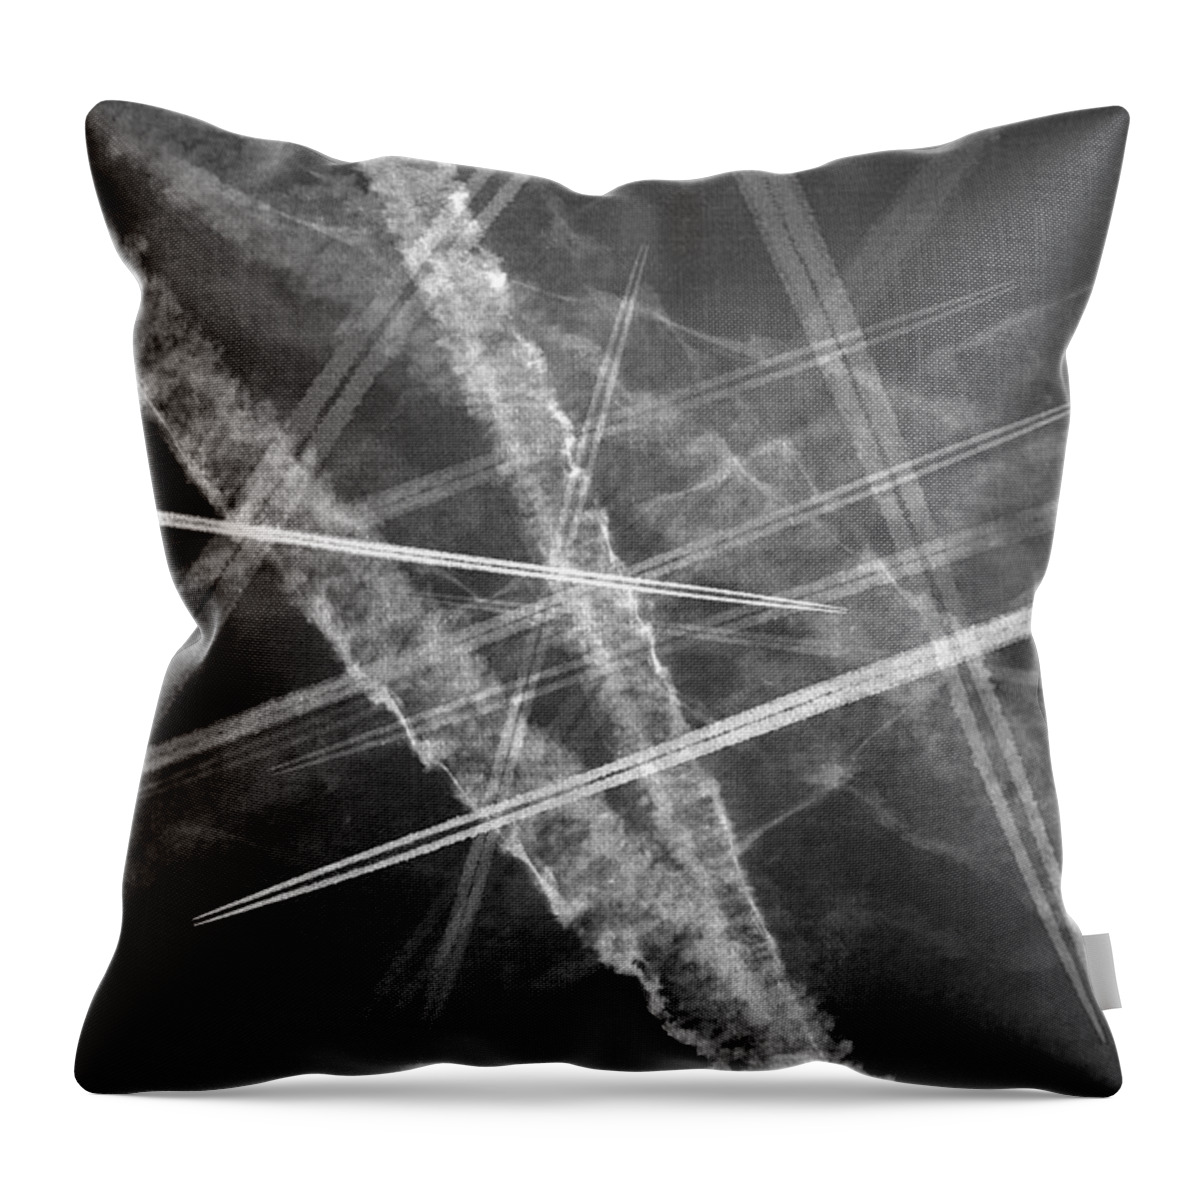 Aeroplane Throw Pillow featuring the photograph Jet trails by Steve Ball